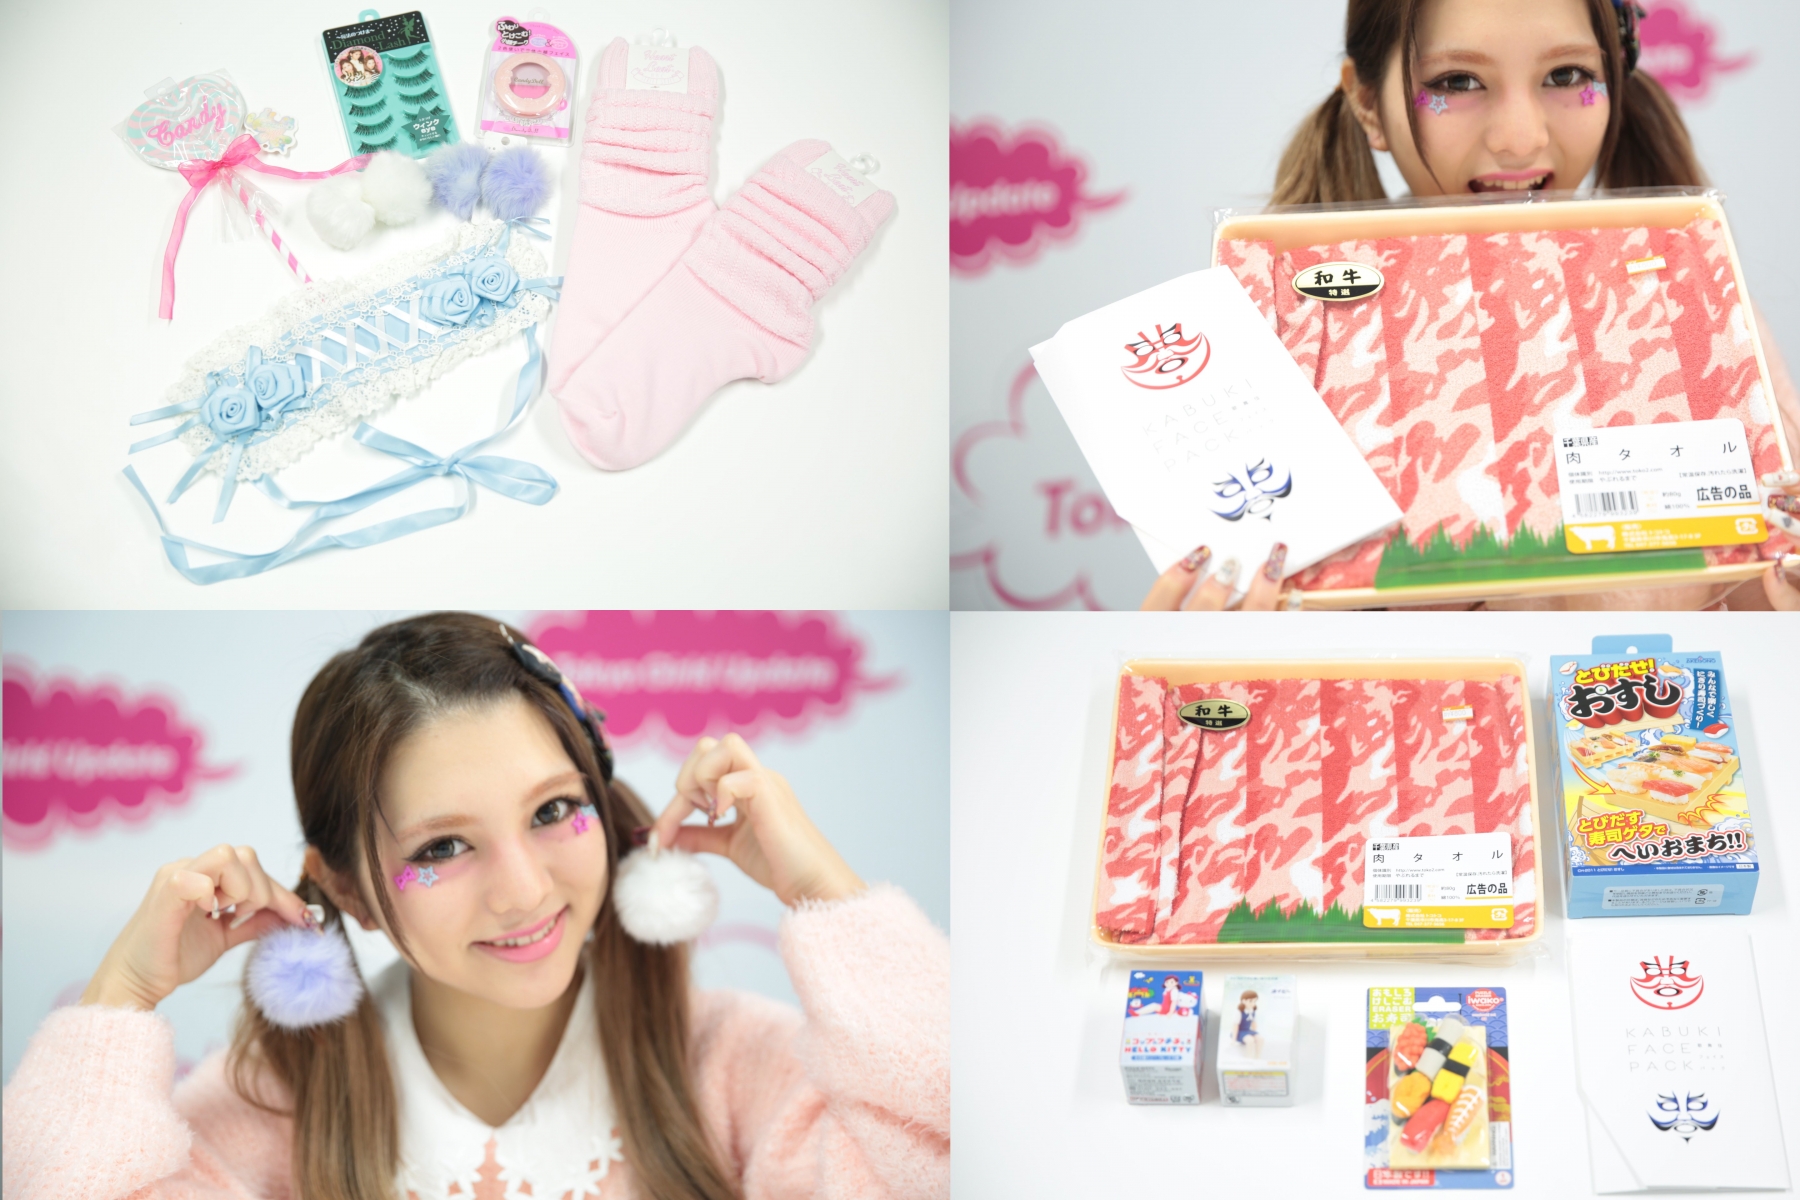 TGU GIVE AWAY: “Tokyo Rad Girls” Box and “Super Cool Awesome Tokyo  Now” Box For 4 Readers!